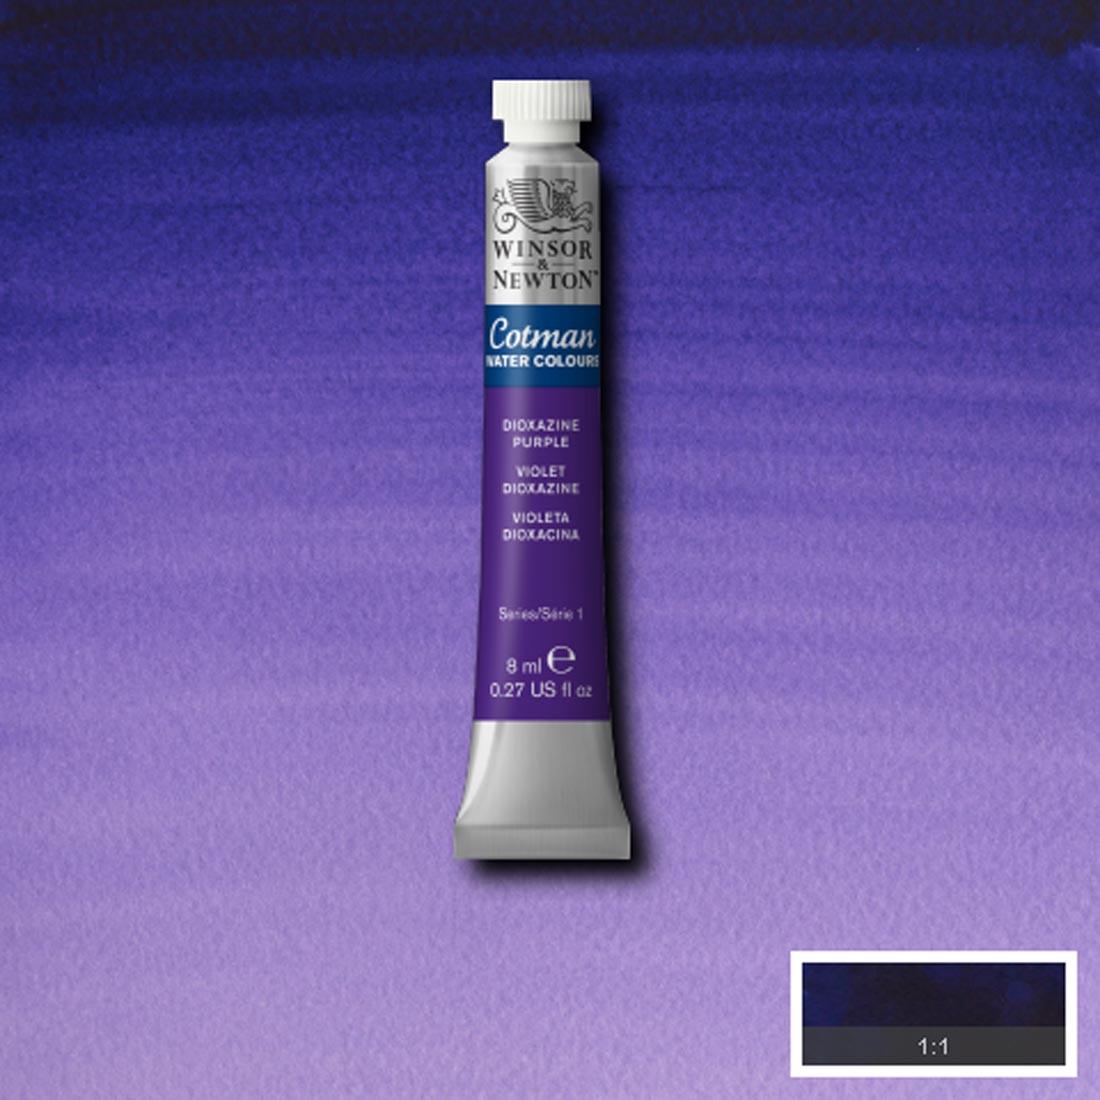 Tube of Dioxazine Purple Winsor & Newton Cotman Water Colour with a paint swatch for the background